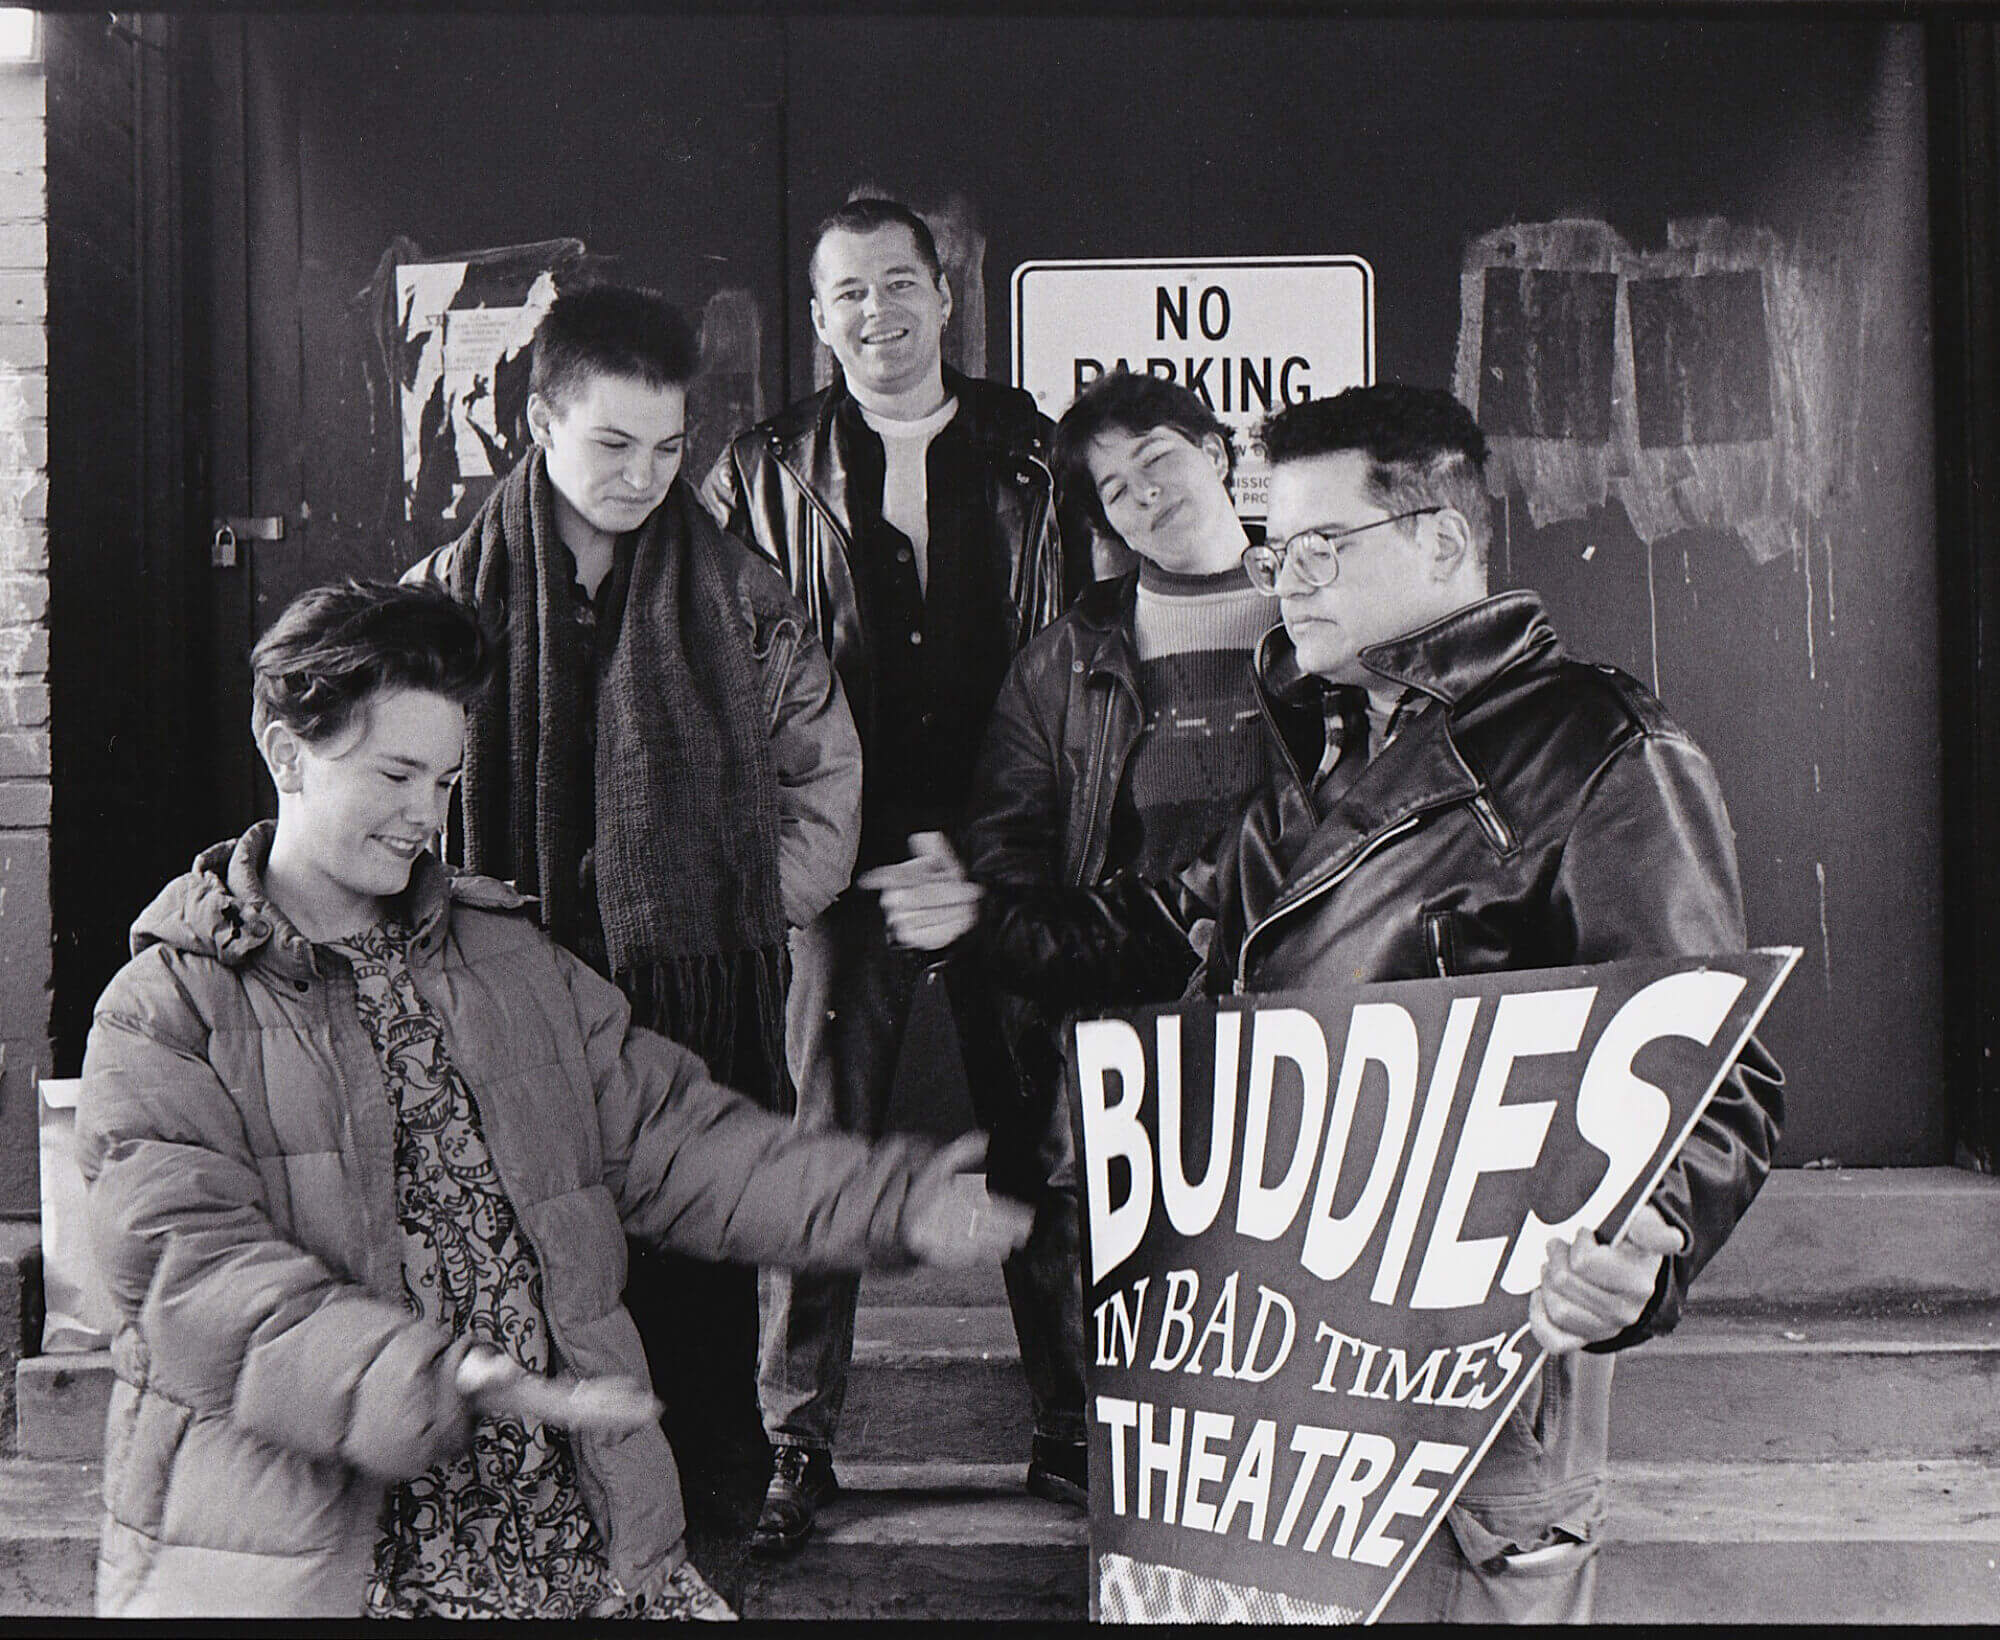 Black and white photograph of five people standing in front of a theatre dressed in warm clothing holding a sign reading "Buddies in Bad Times Theatre"